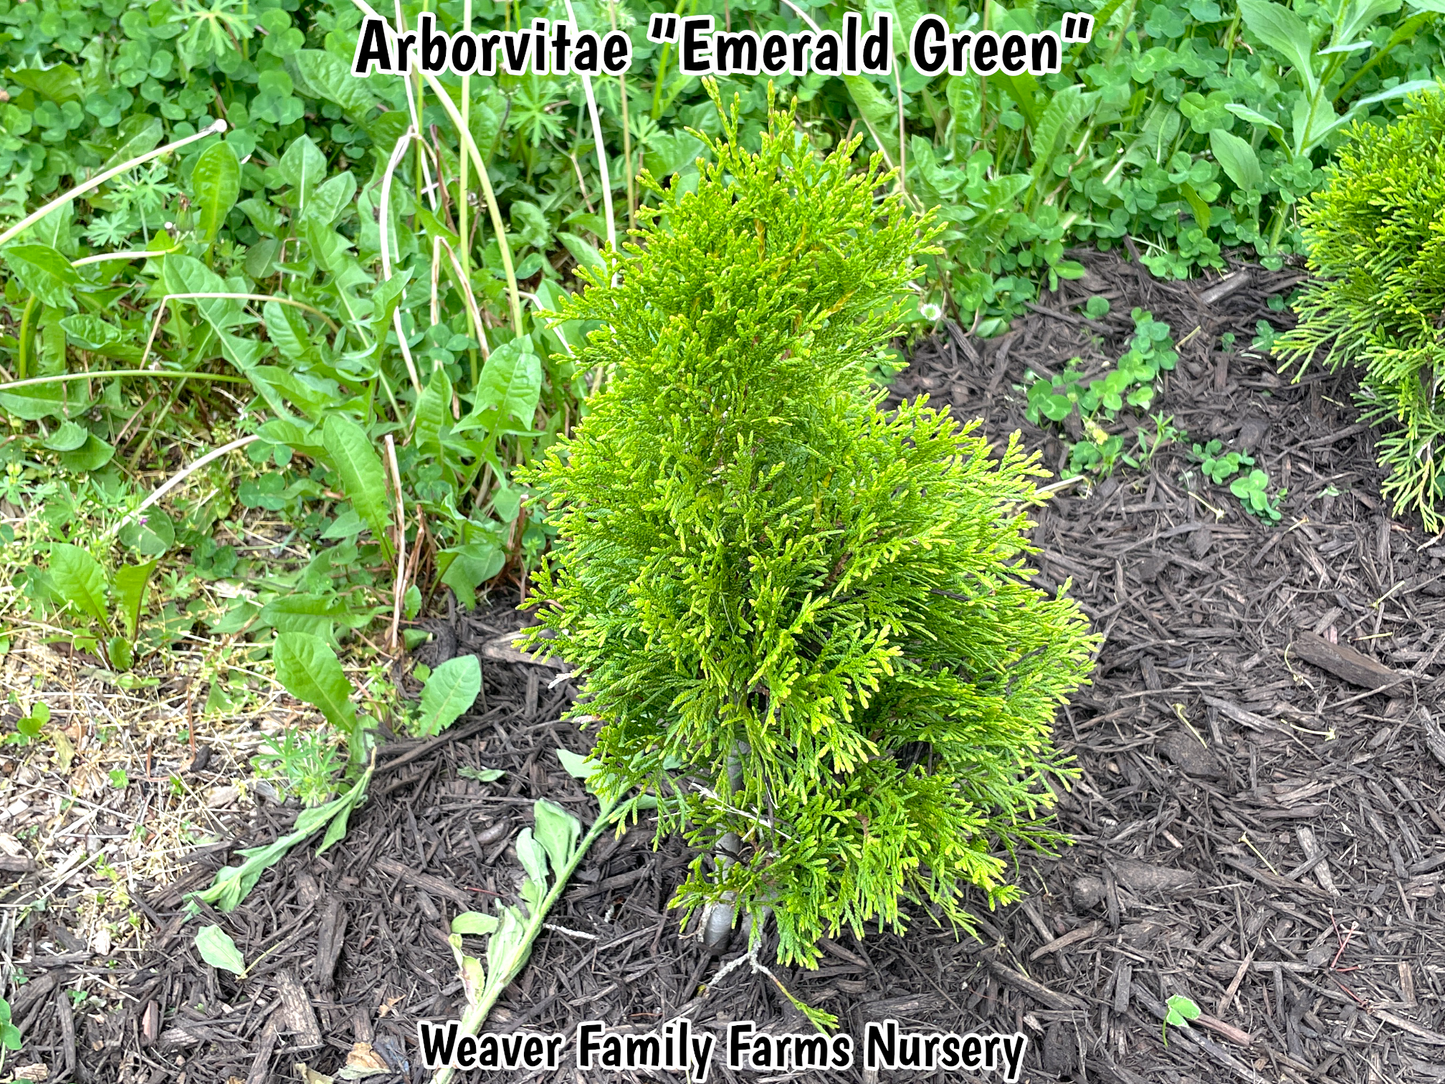 Close-up of the fine, soft foliage of Emerald Green Arborvitae, emphasizing its texture and rich color in garden designs.